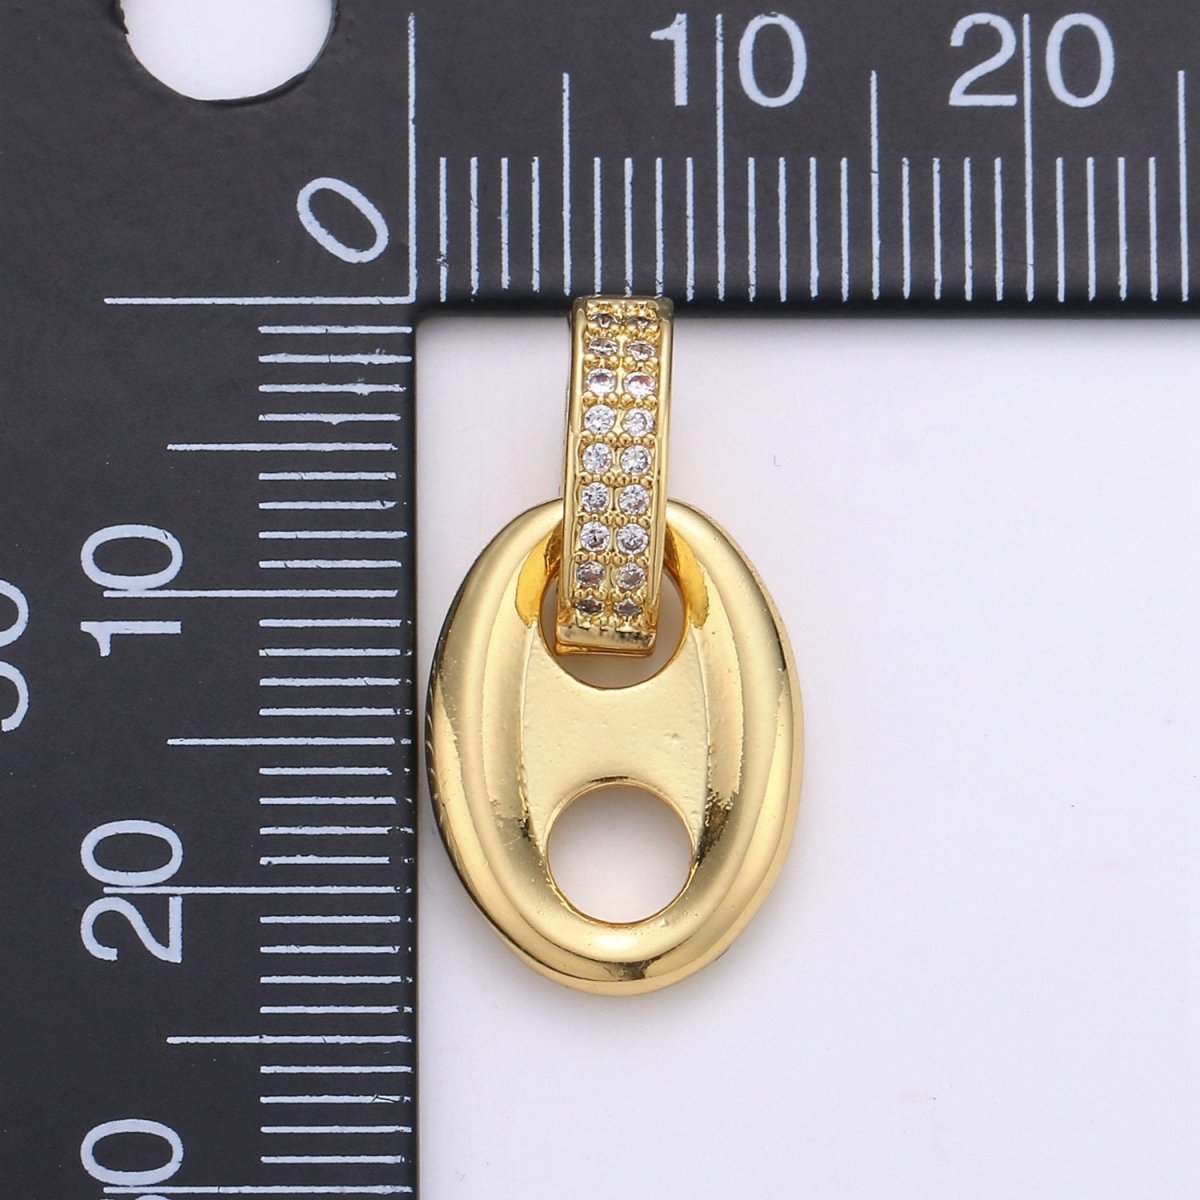 24k Gold Filled Soda Tab Charm for Necklace Pendant Beer Tab Can Tab Jewelry Making Supply J-002 J-003 - DLUXCA